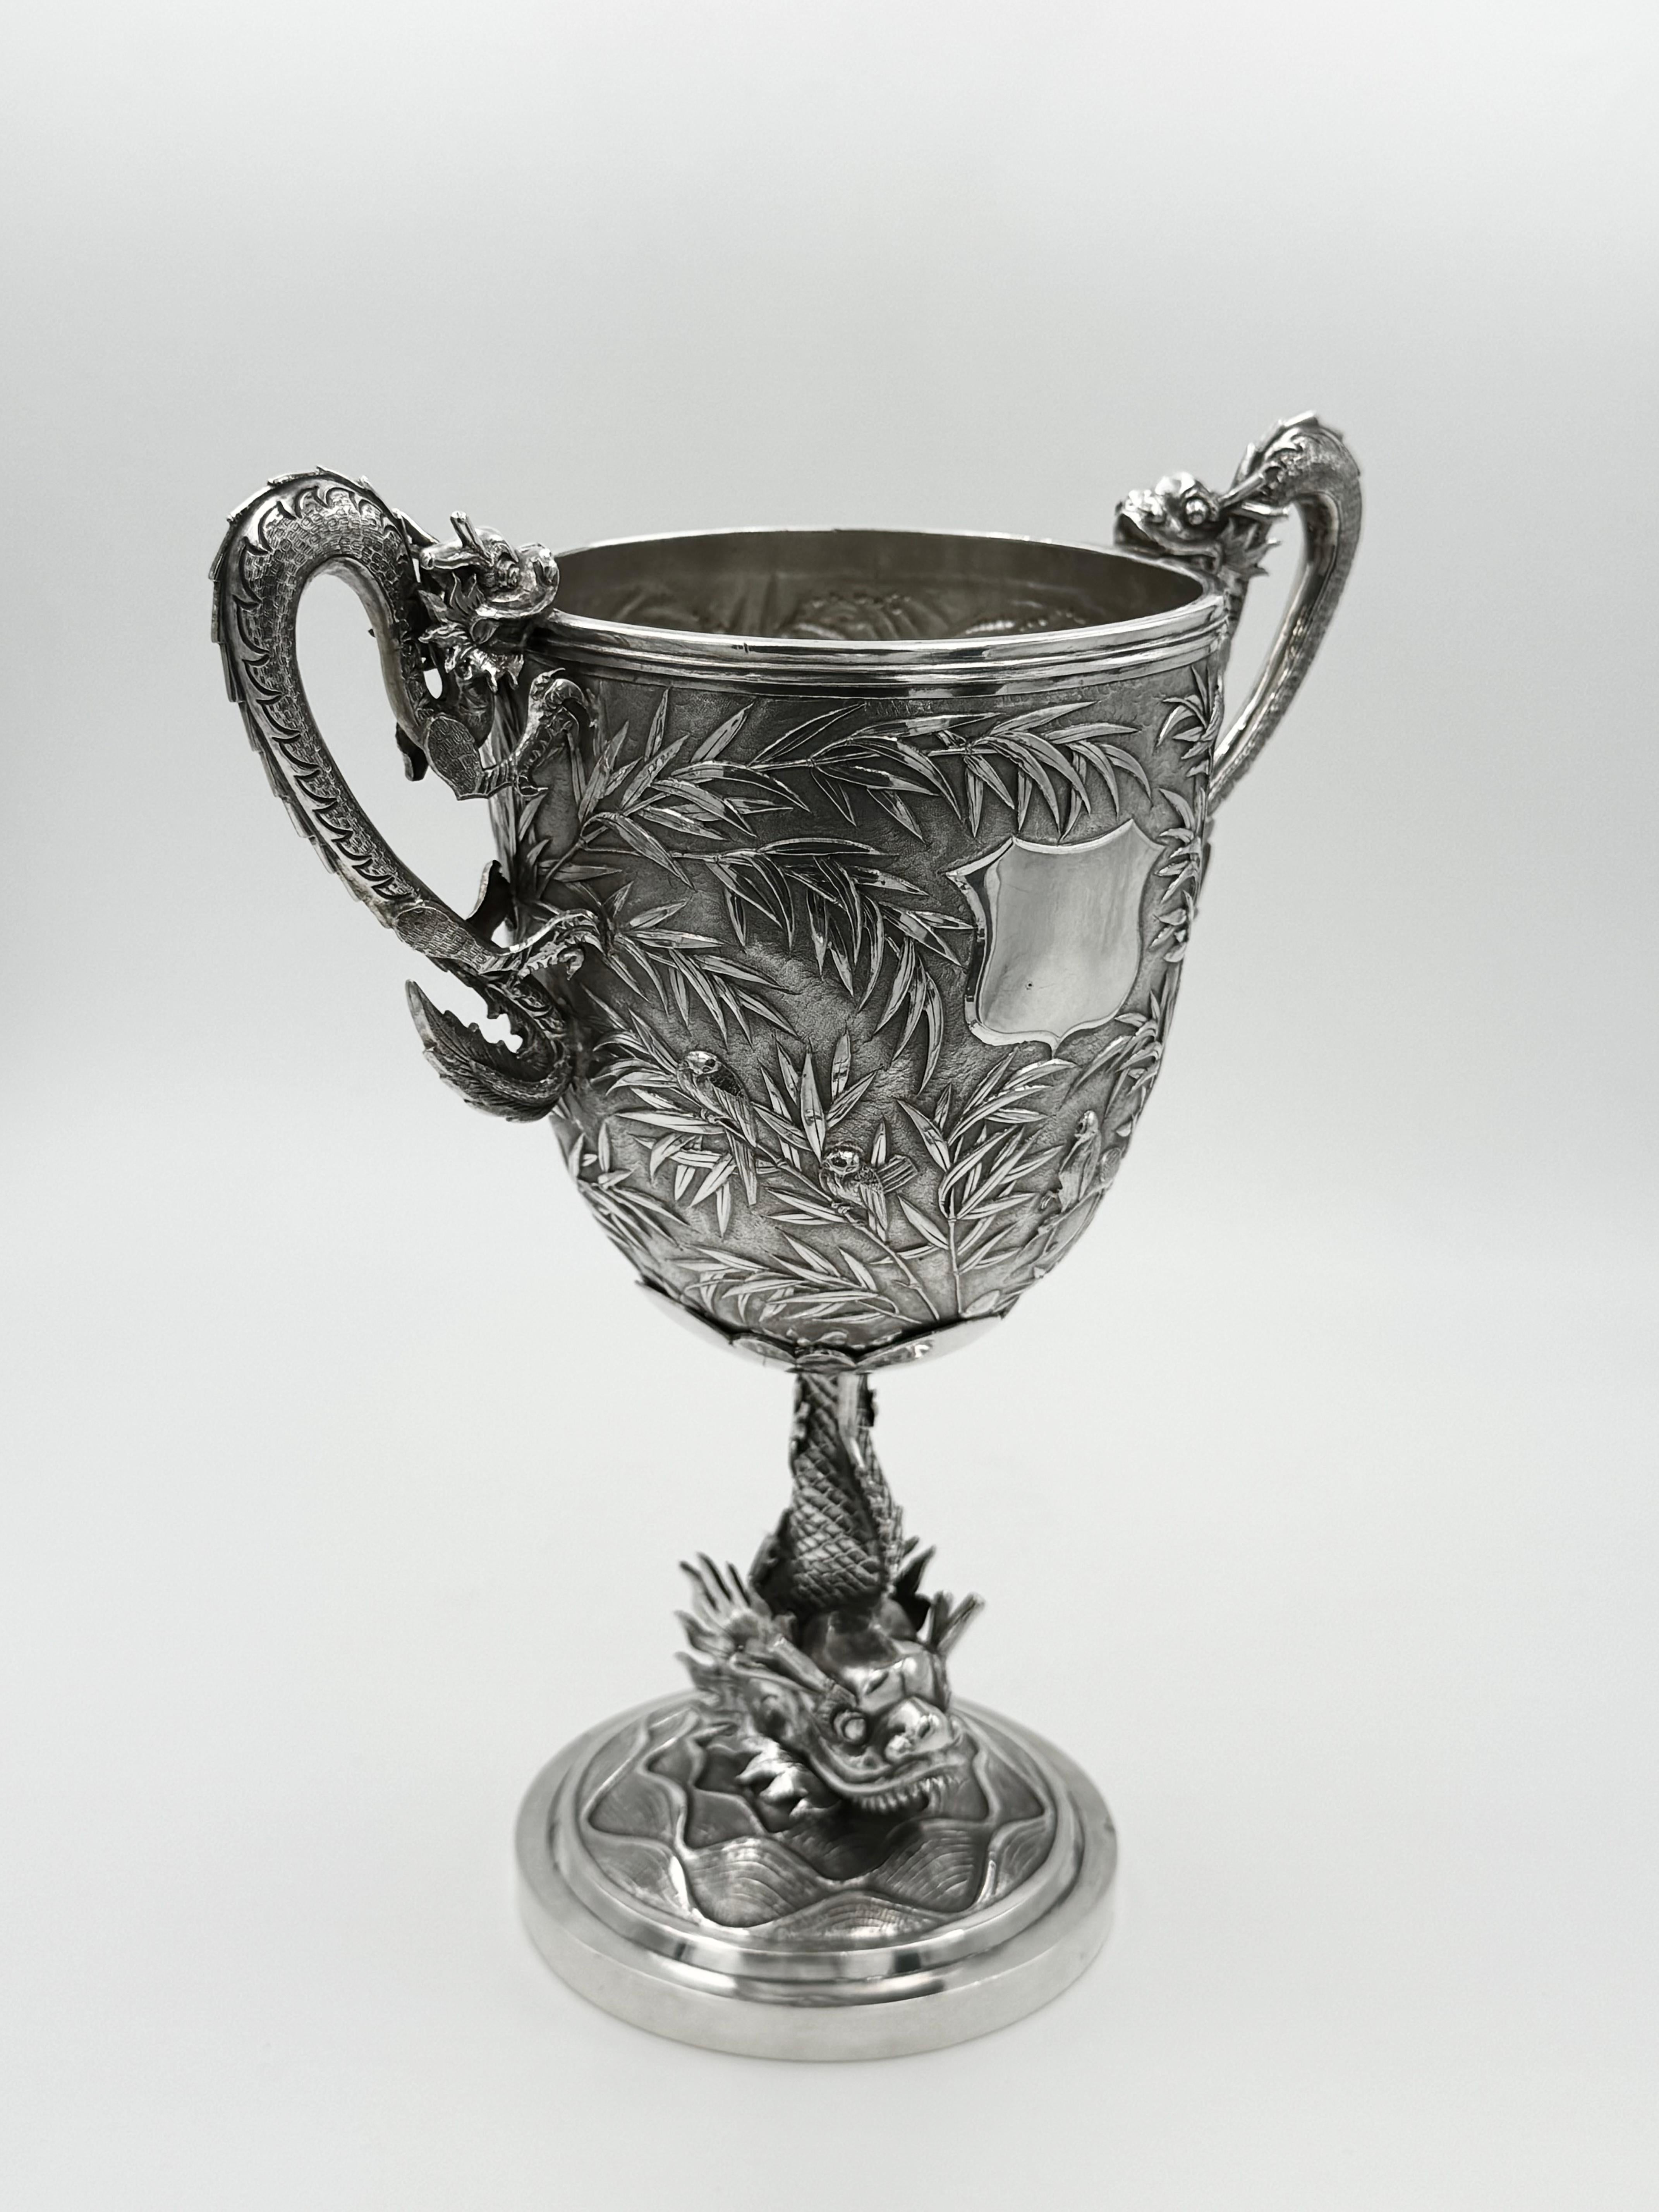 Late 19th Century Chinese Export Silver Cup